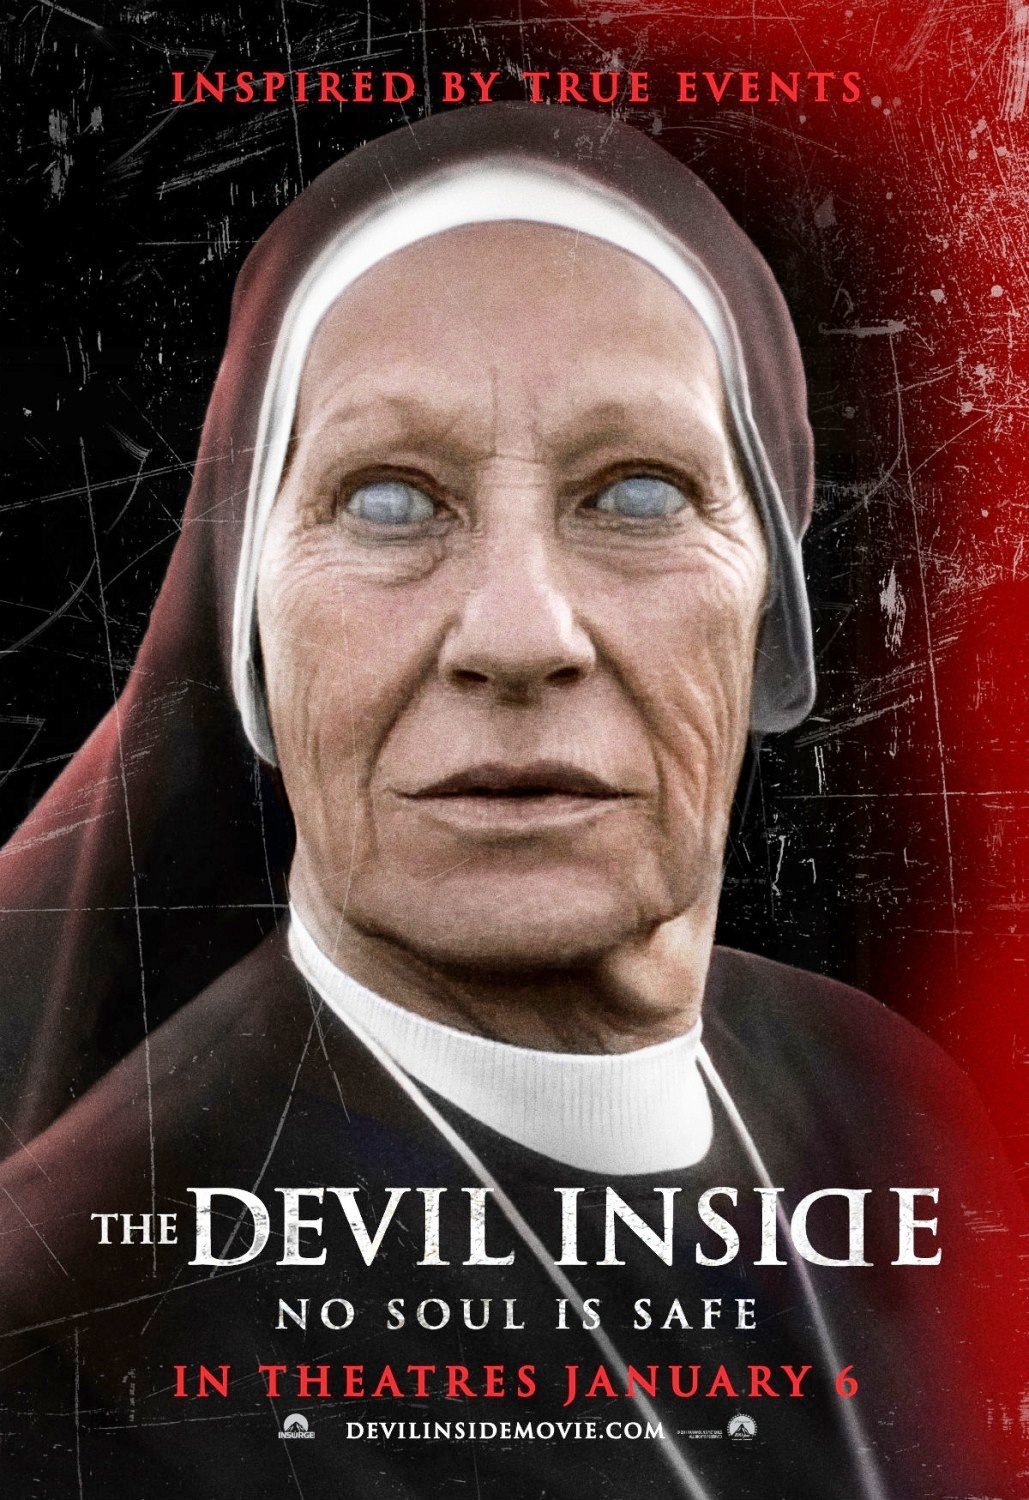 Poster of Paramount Pictures' The Devil Inside (2012)